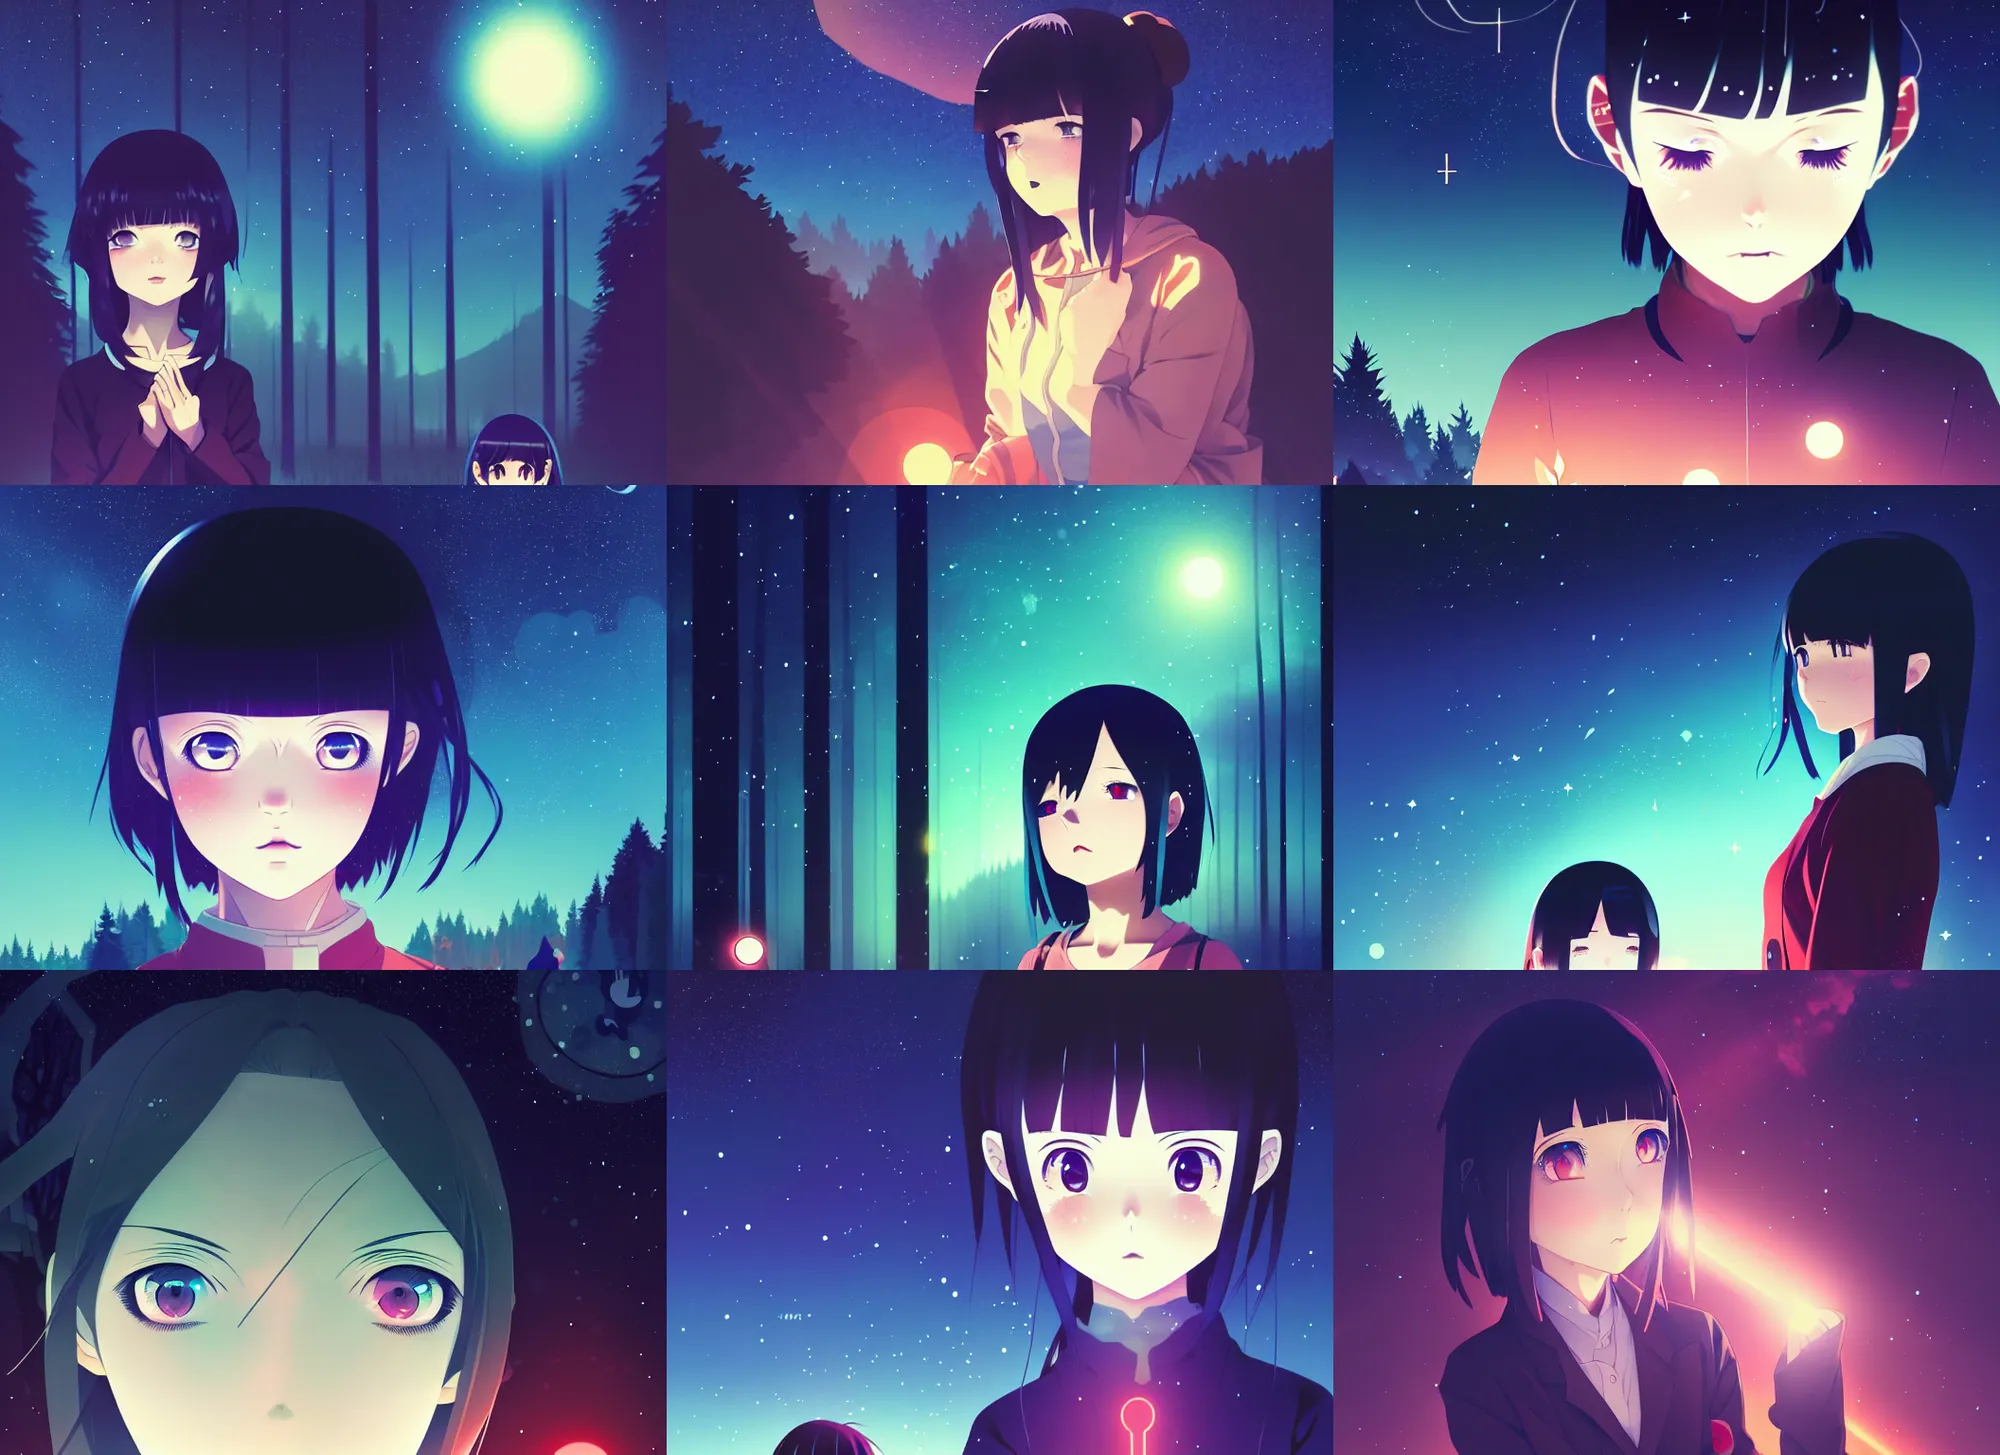 Prompt: flat, anime key visual, young woman traveling in a forest at night, night sky, nebula, very dark, cute face by ilya kuvshinov, yoh yoshinari, dynamic pose, dynamic perspective, rounded eyes, ghost in the shell, kyoani, smooth facial features, dramatic lighting,